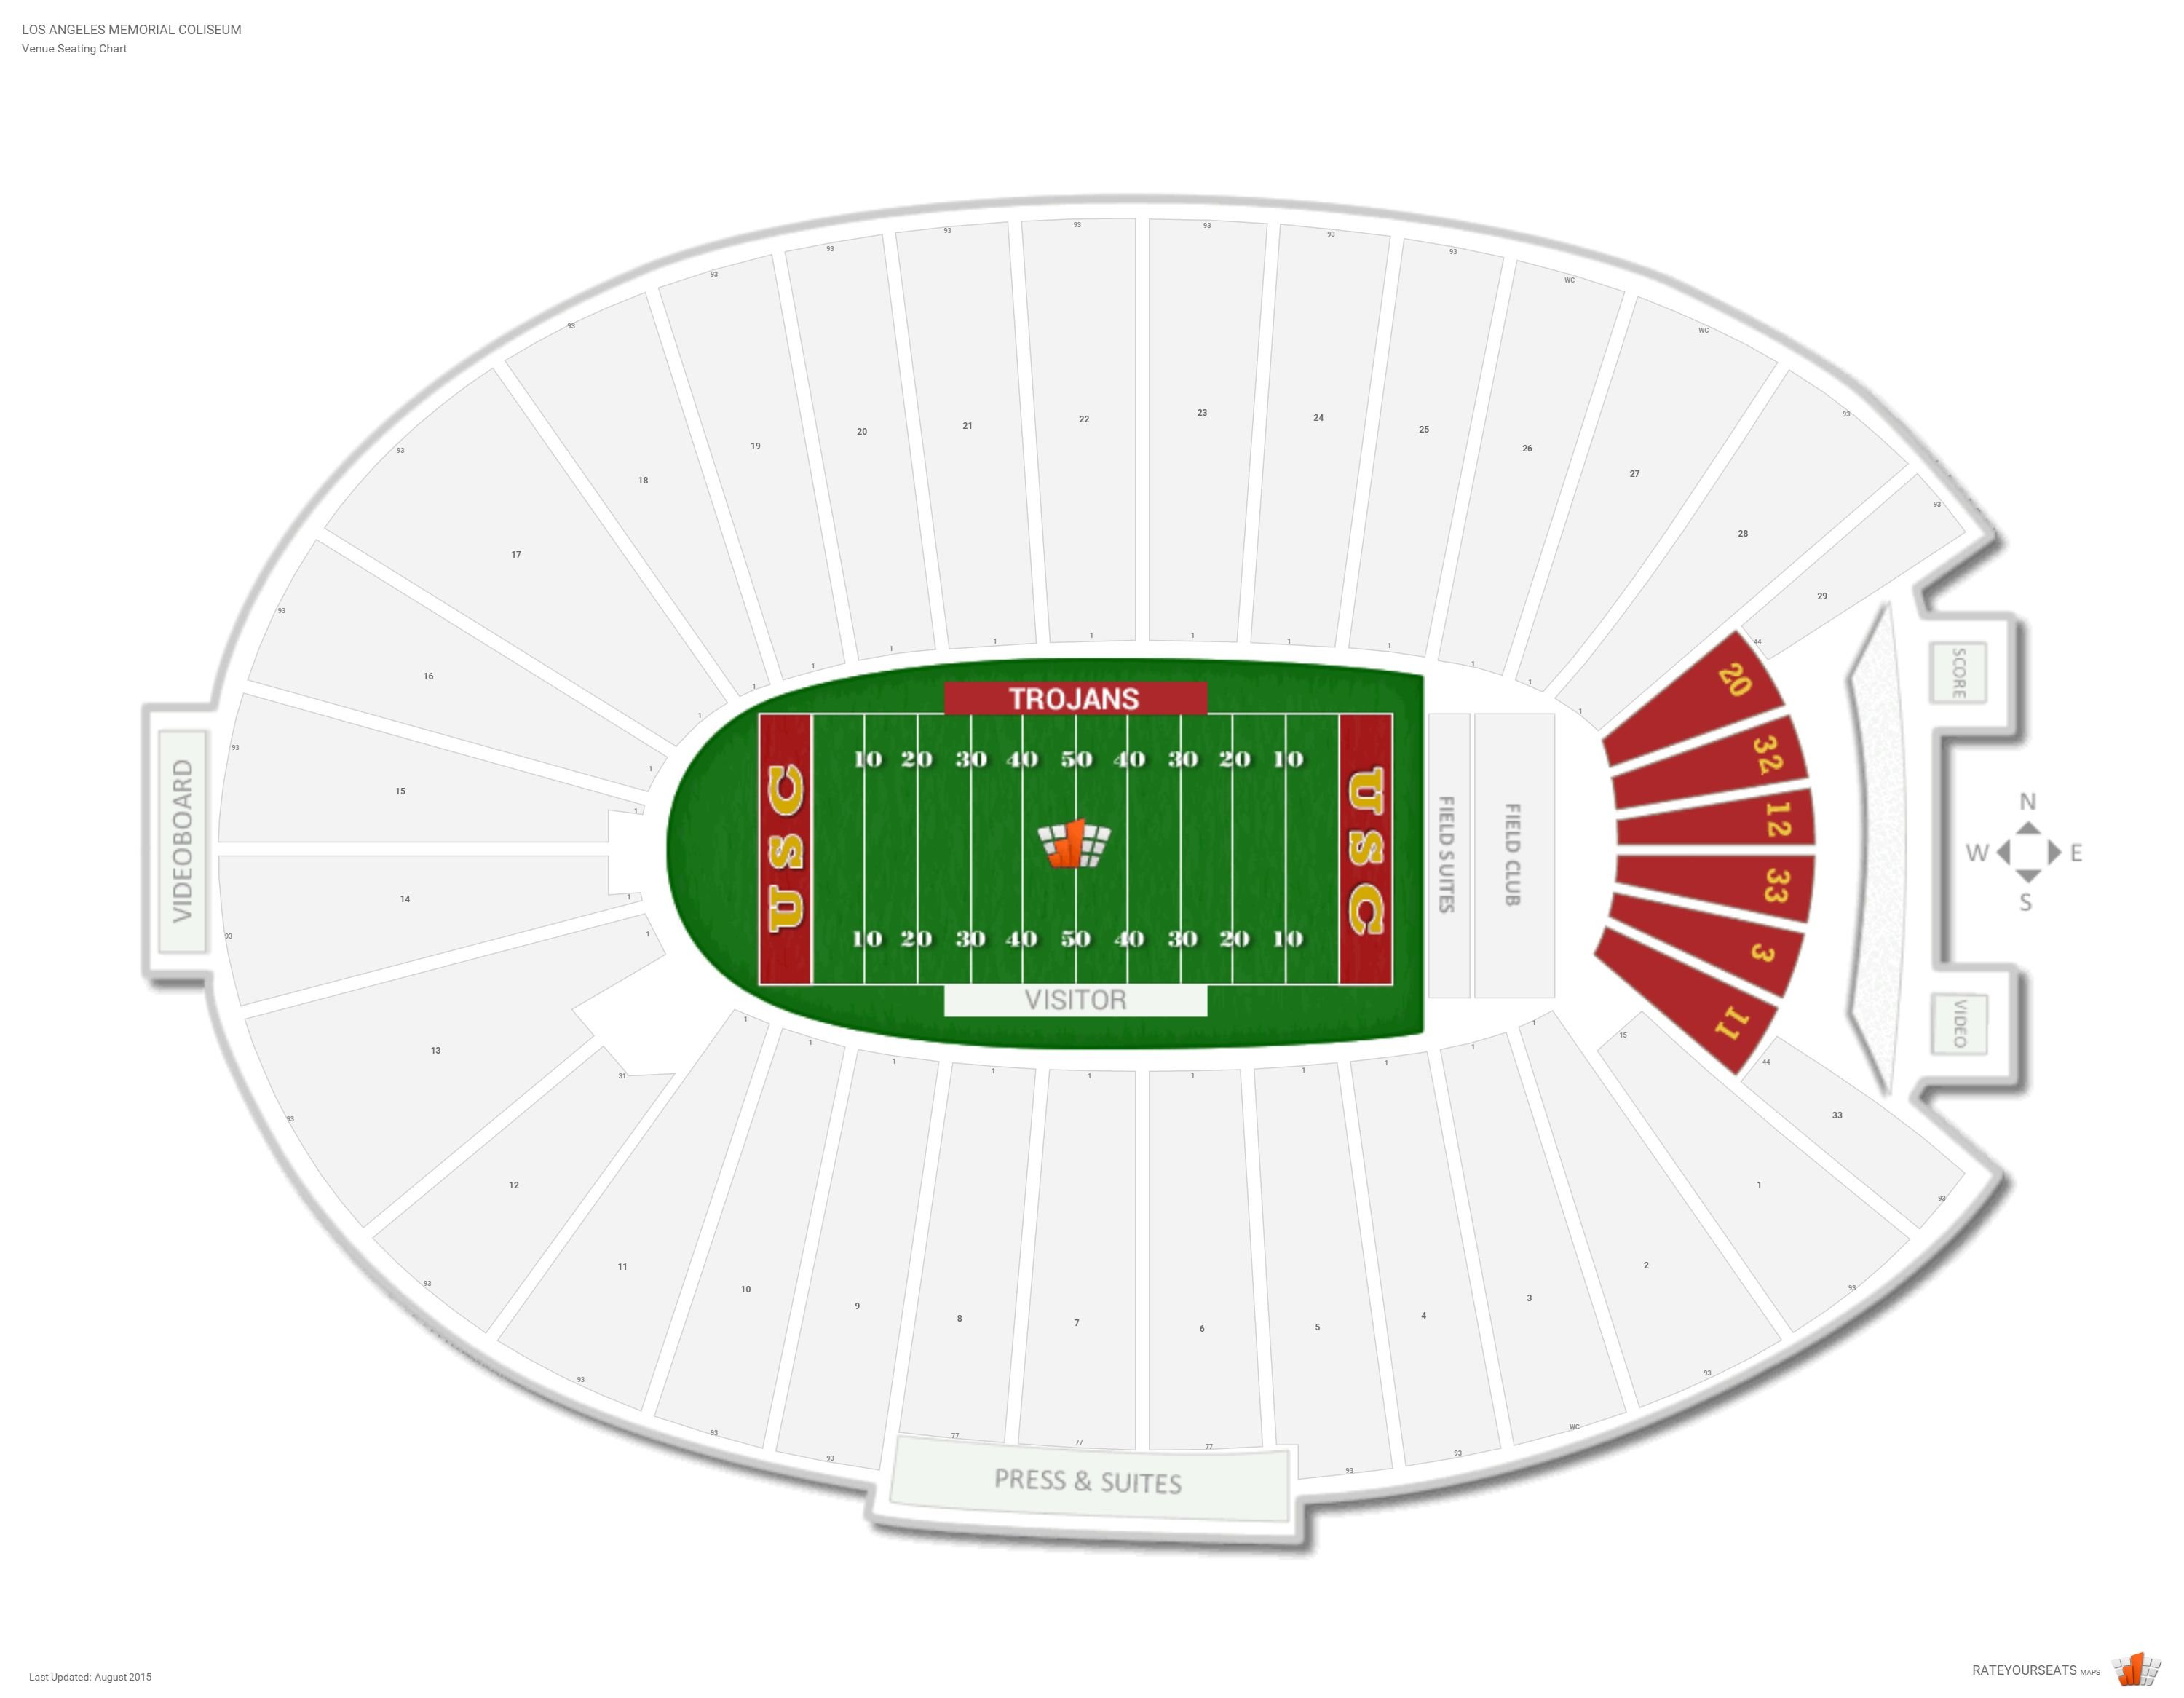 La Coliseum Seating Chart With Seat Numbers